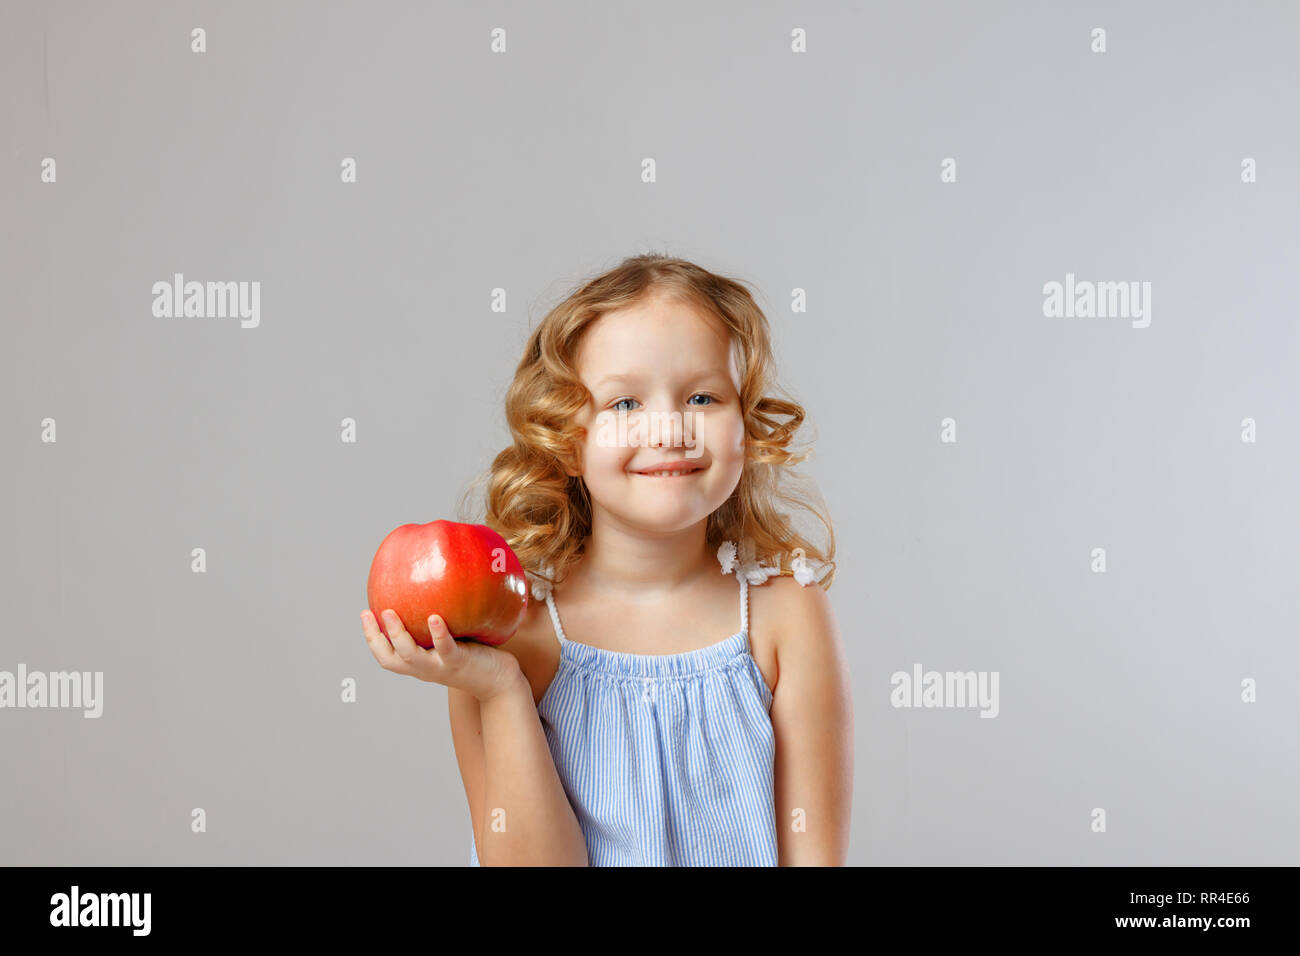 Happy little girl child holding a red apple. Healthy food. Gray background, studio, portrait Stock Photo